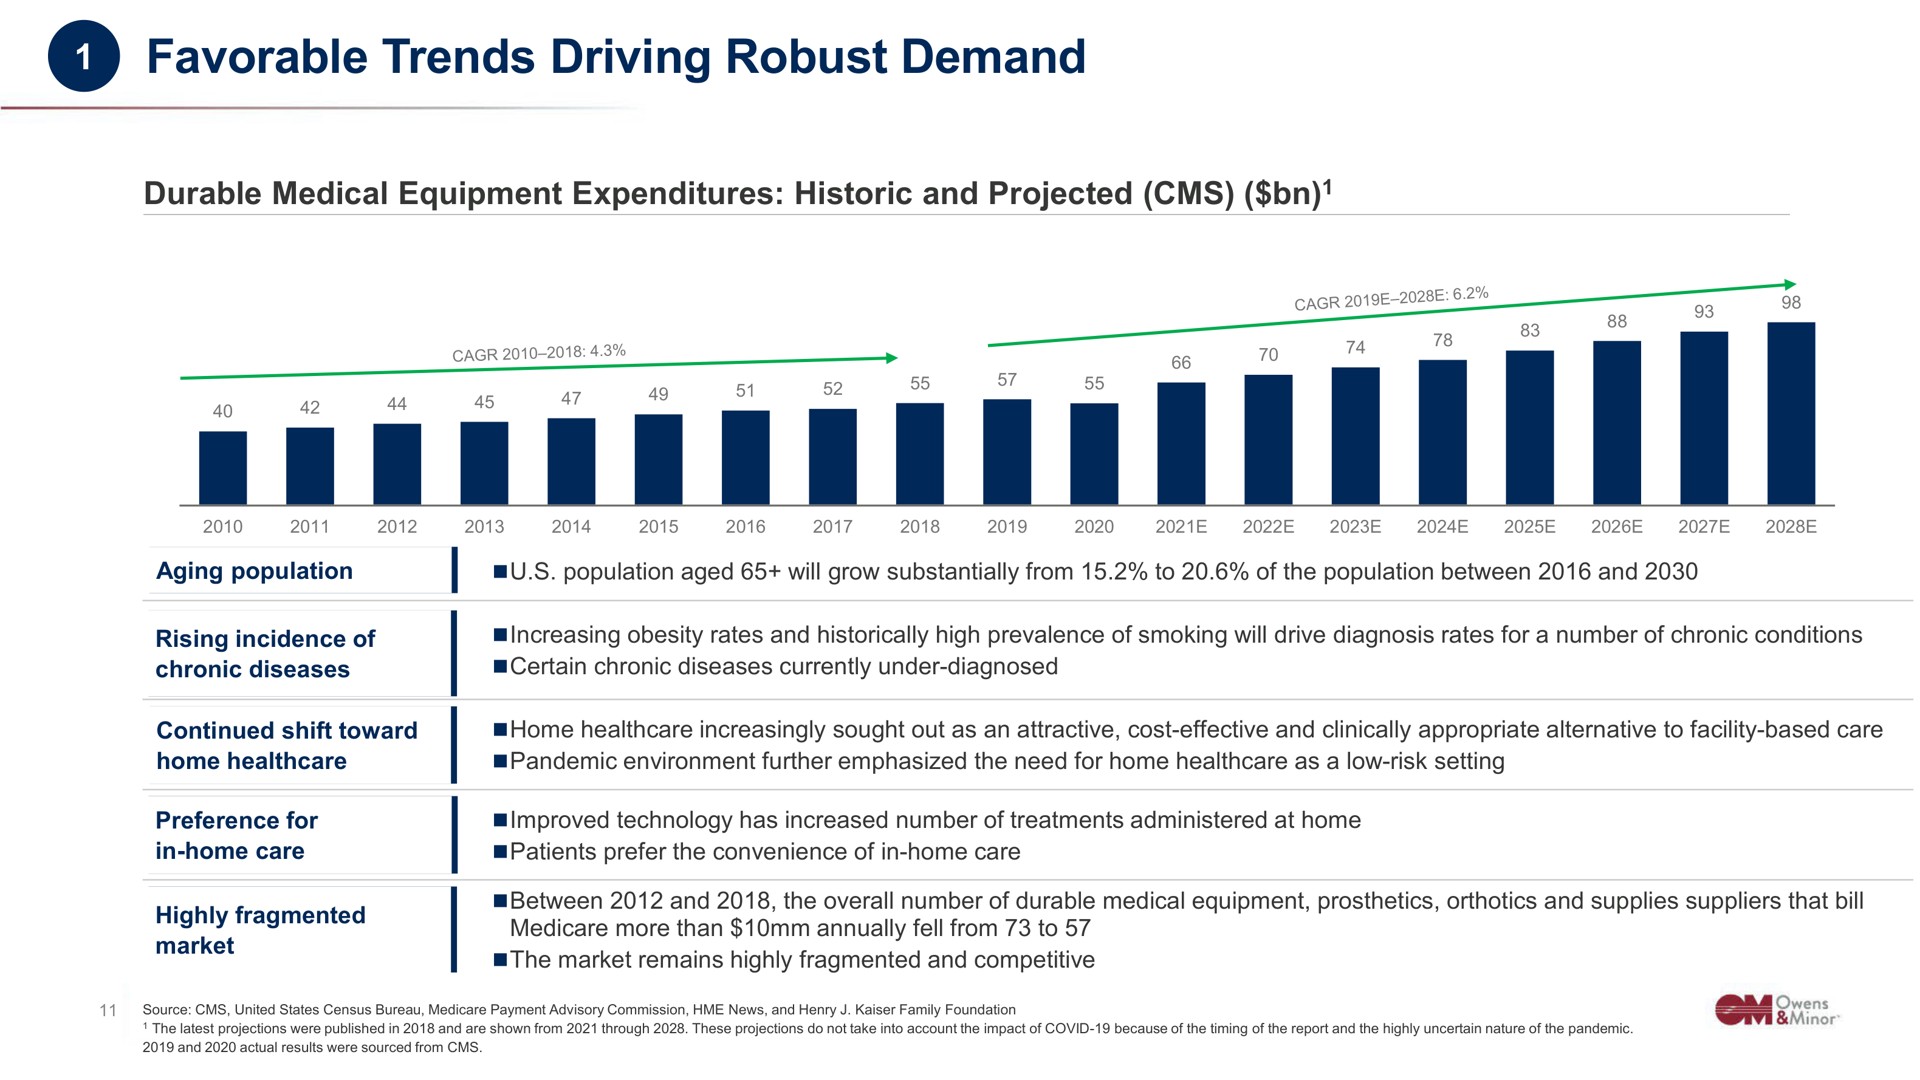 favorable trends driving robust demand | Owens&Minor